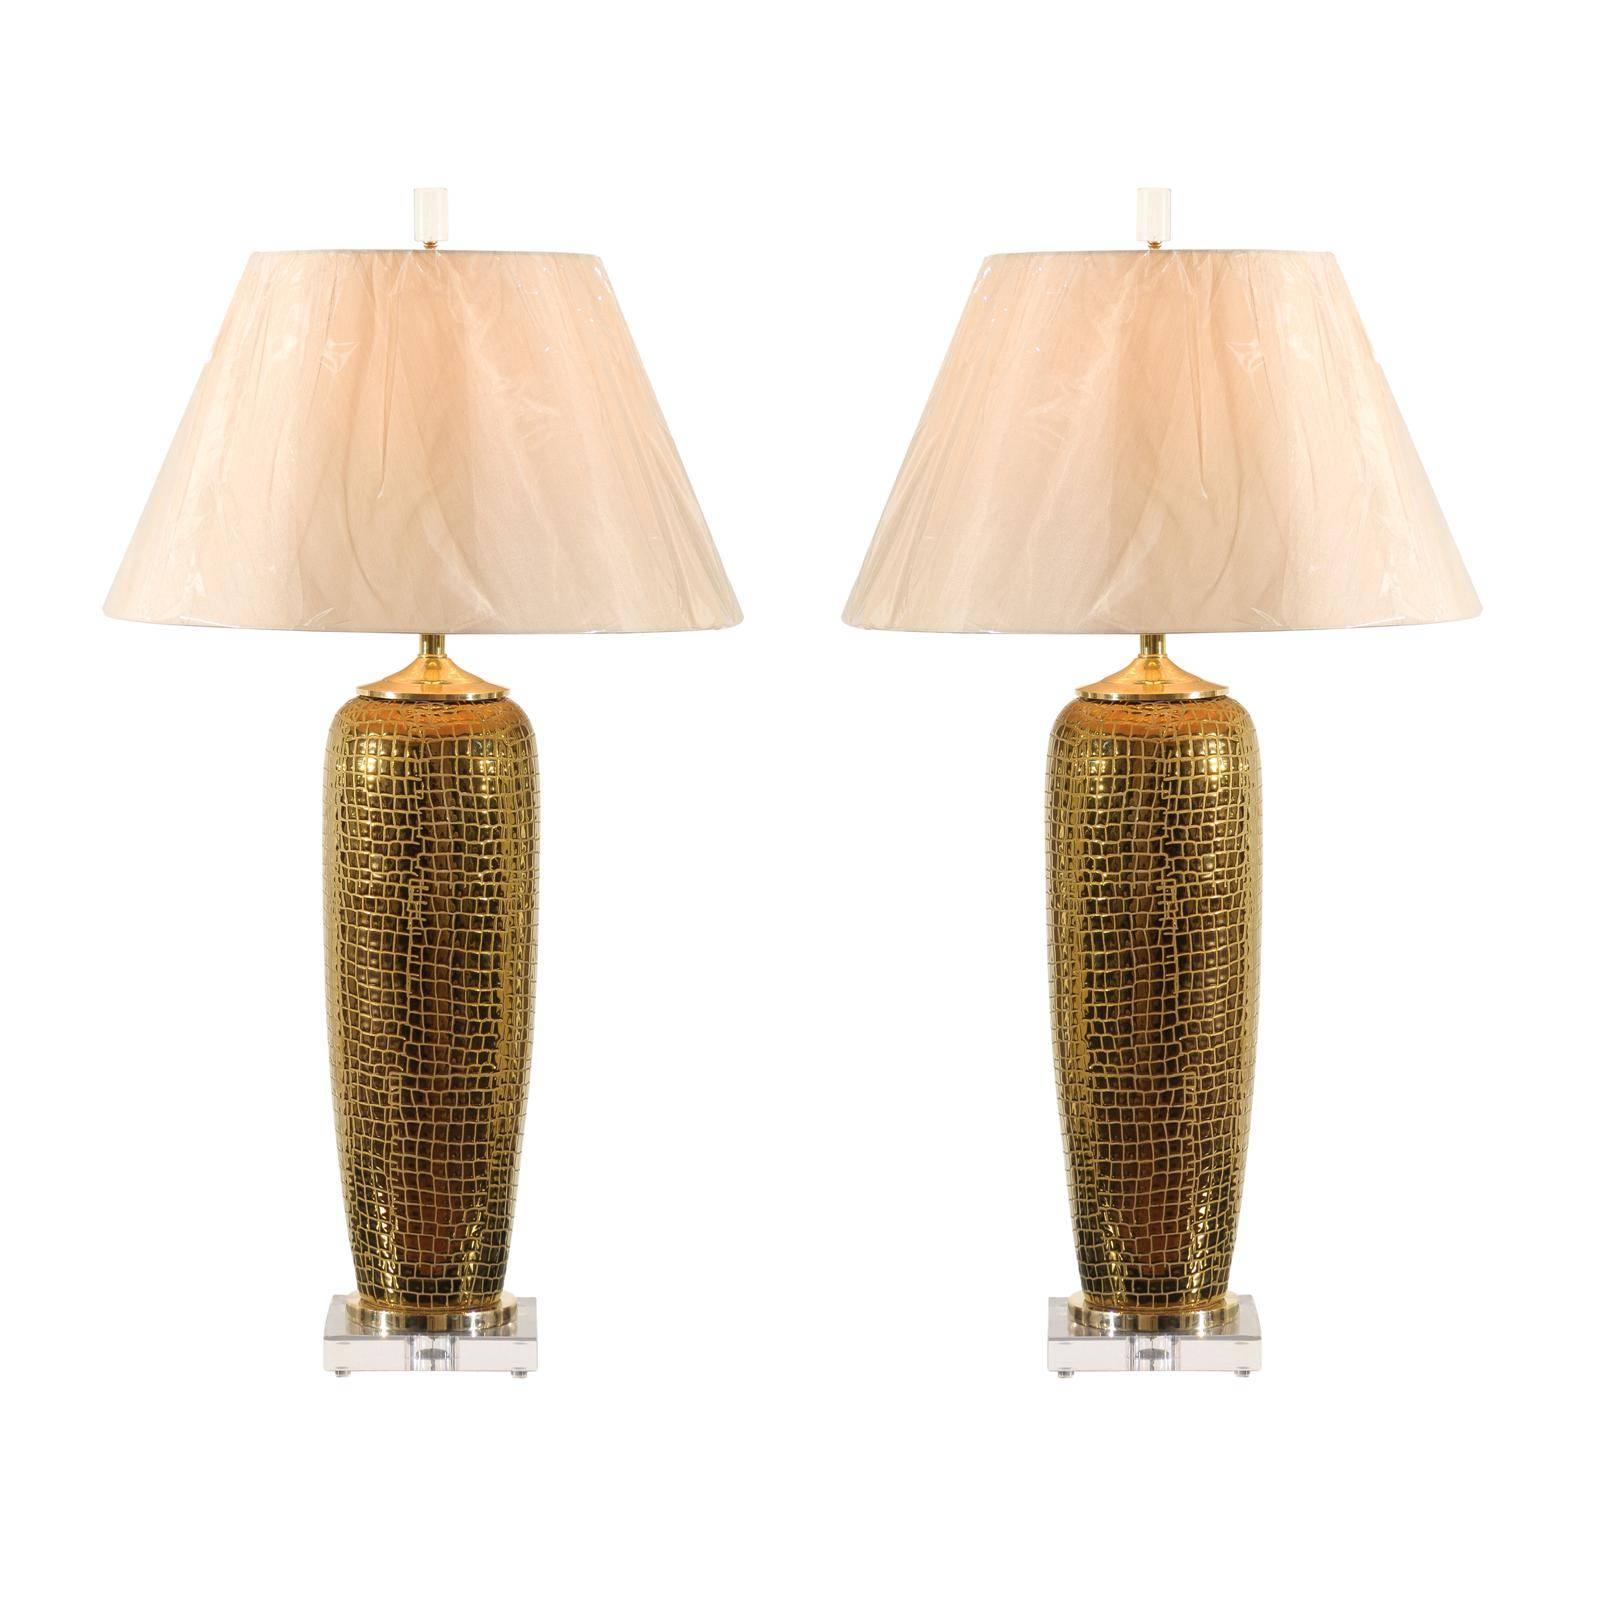 Spectacular Pair of Gold Crocodile Textured Ceramic Vessels as Custom Lamps